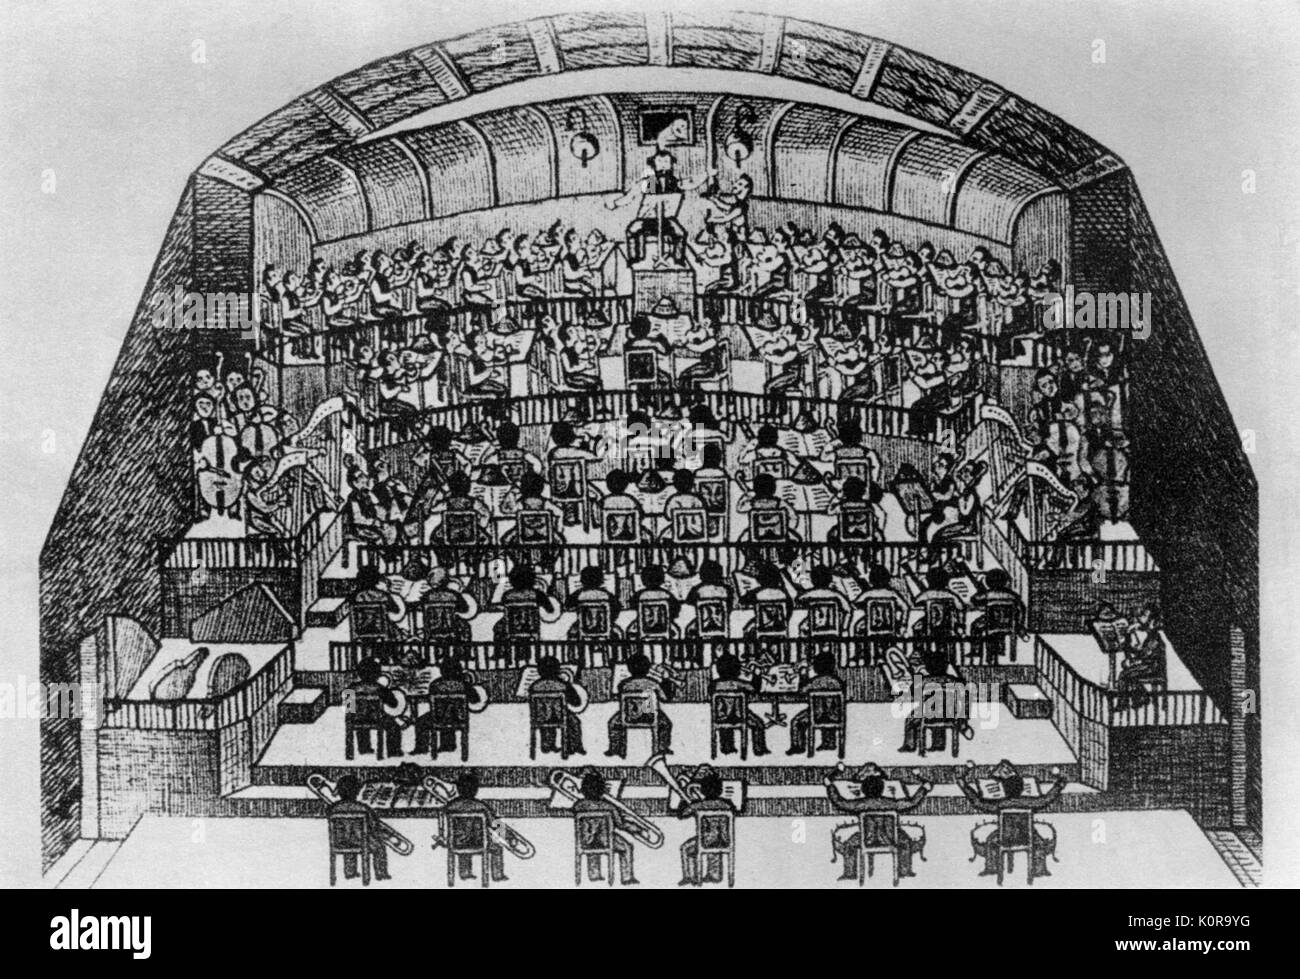 Rehearsal of Richard Wagner ' s Parsifal, 1882 by Bayreuth Orchestra in 1882. Herman Levi conducting. Wagner looking through cowl at the top. F.Strauss playing the horn, 2nd left on 3rd row from below. Drawn by Munich 1st clarinettist, H. Henzl. Late 19th century Orchestra Stock Photo